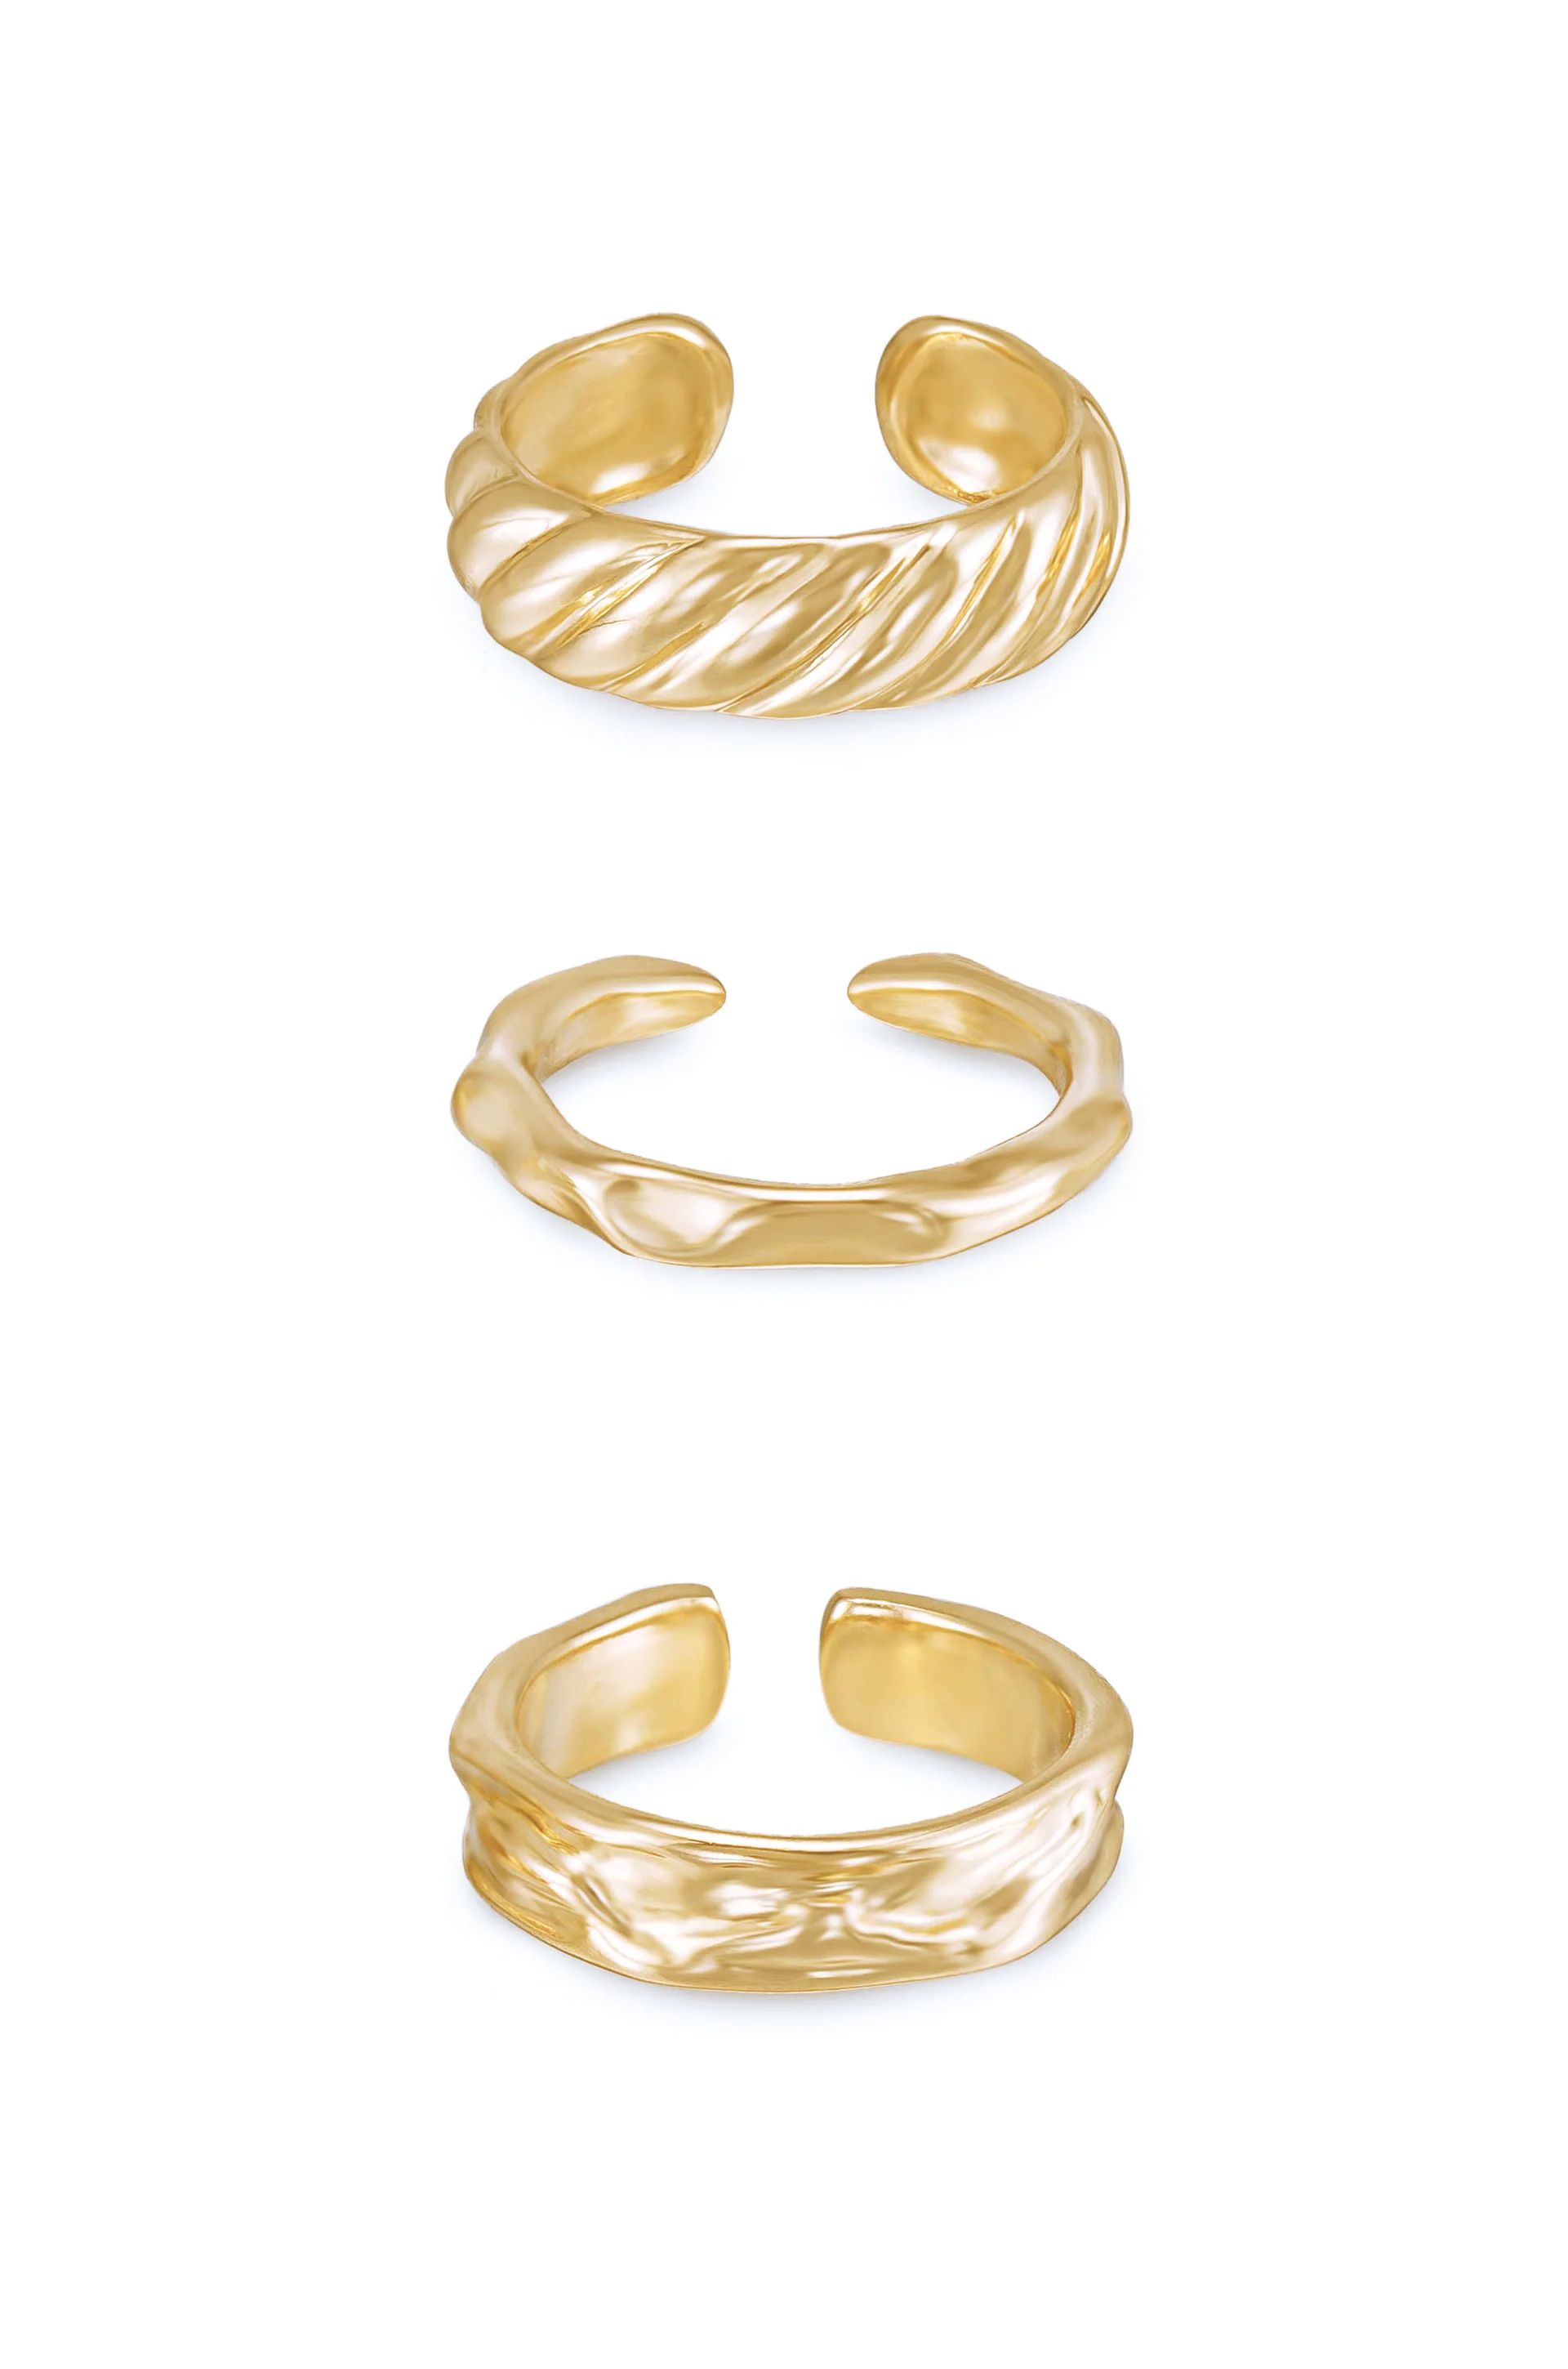 Hand Worked 18k Gold Plated Ring Set of 3 | Ettika